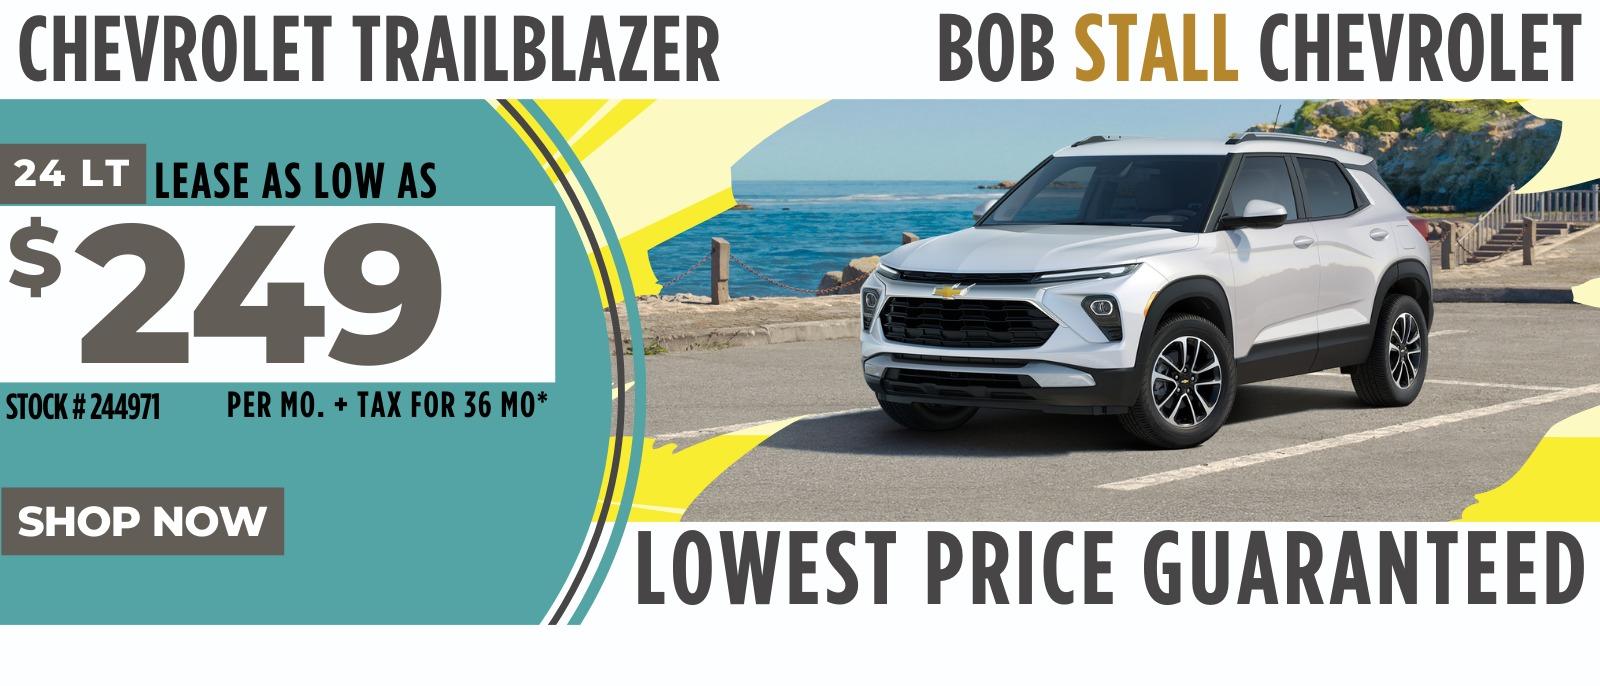 2024 Trailblazer Savings - Lease as low as $249 per month for 36 Months